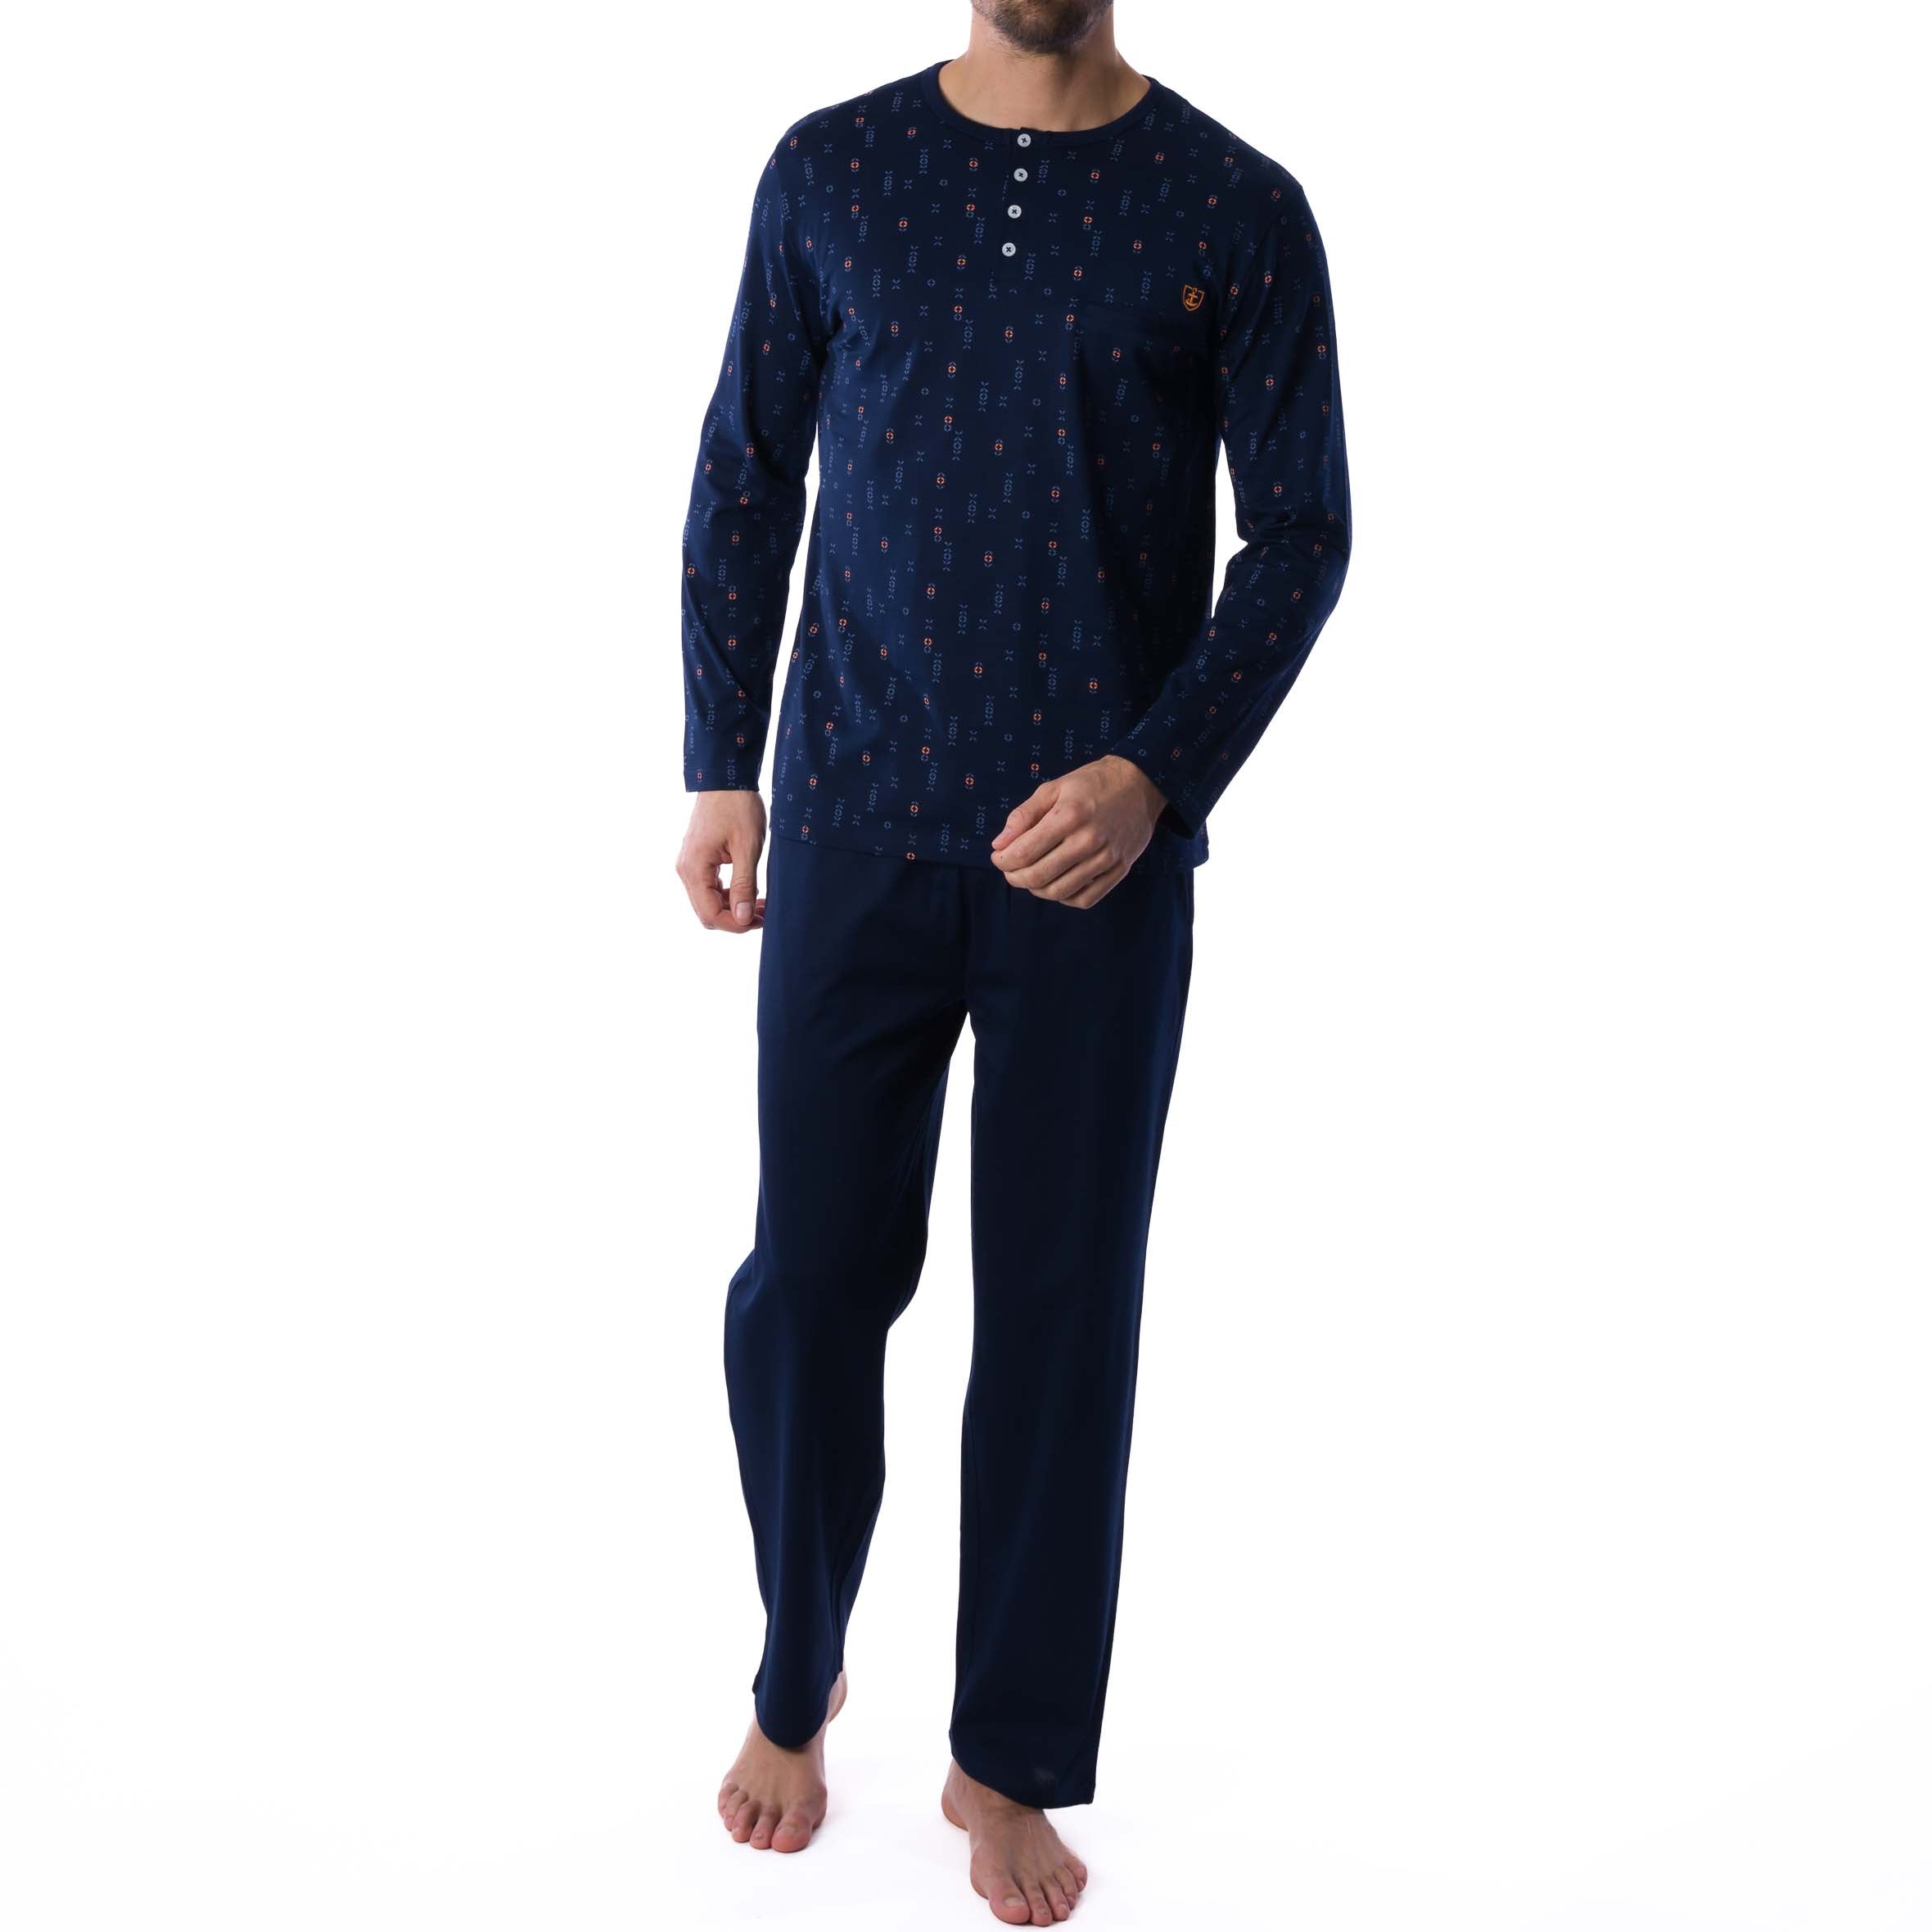 Buttoned Collar Pajamas in Navy Blue Printed Mercerized Cotton Jersey